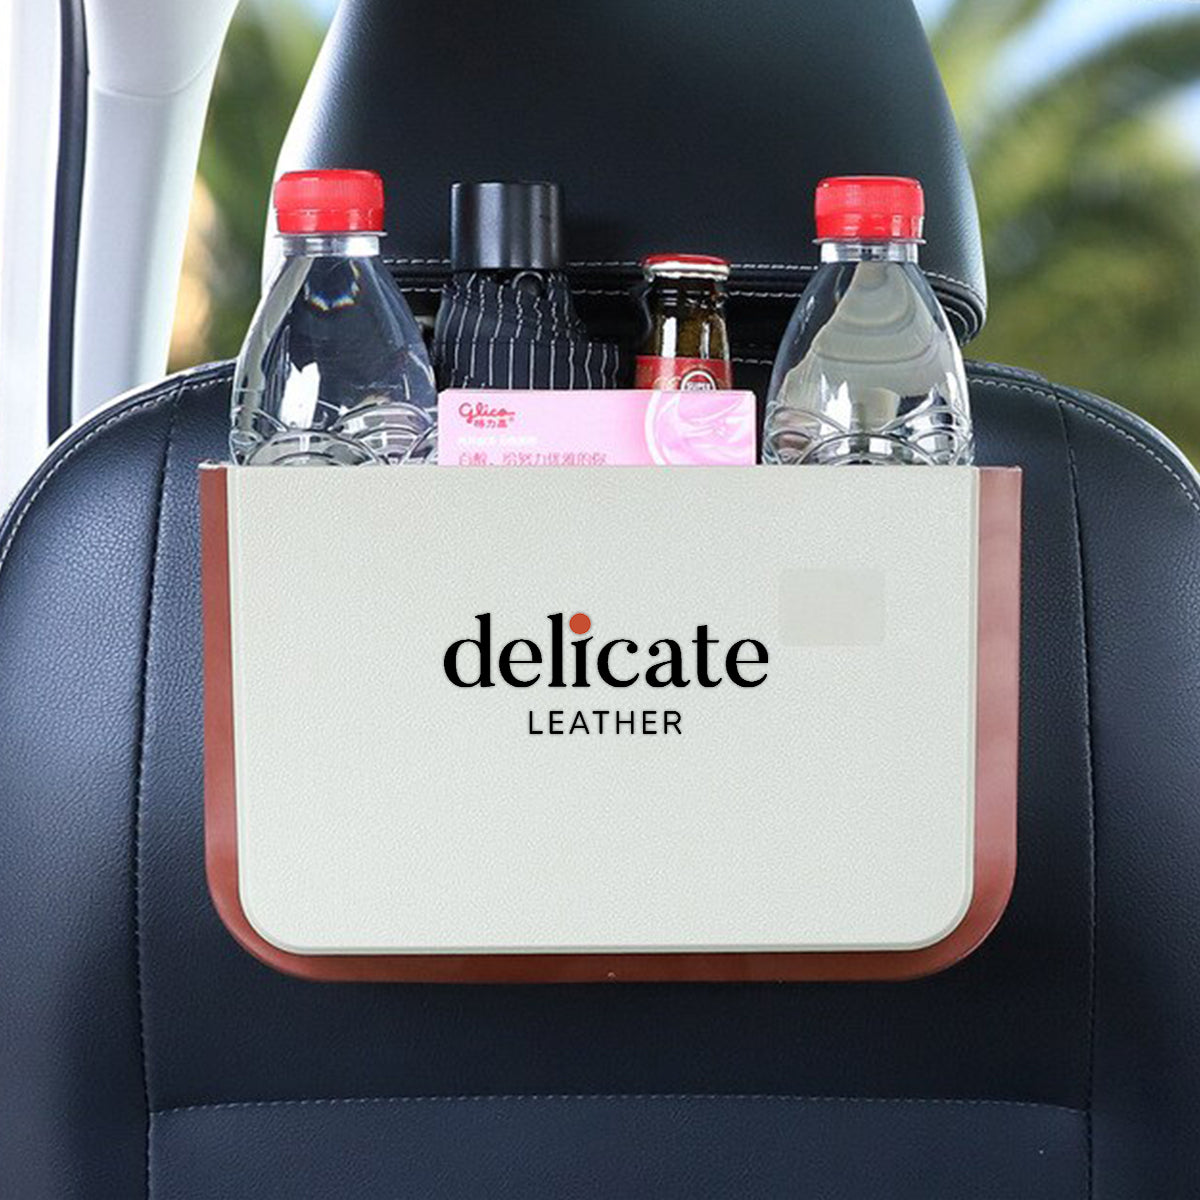 Delicate Leather Hanging Waterproof Car Trash can-Foldable, Custom For Your Cars, Waterproof, and Equipped with Cup Holders and Trays. Multi-Purpose, Car Accessories WQ11992 - Delicate Leather